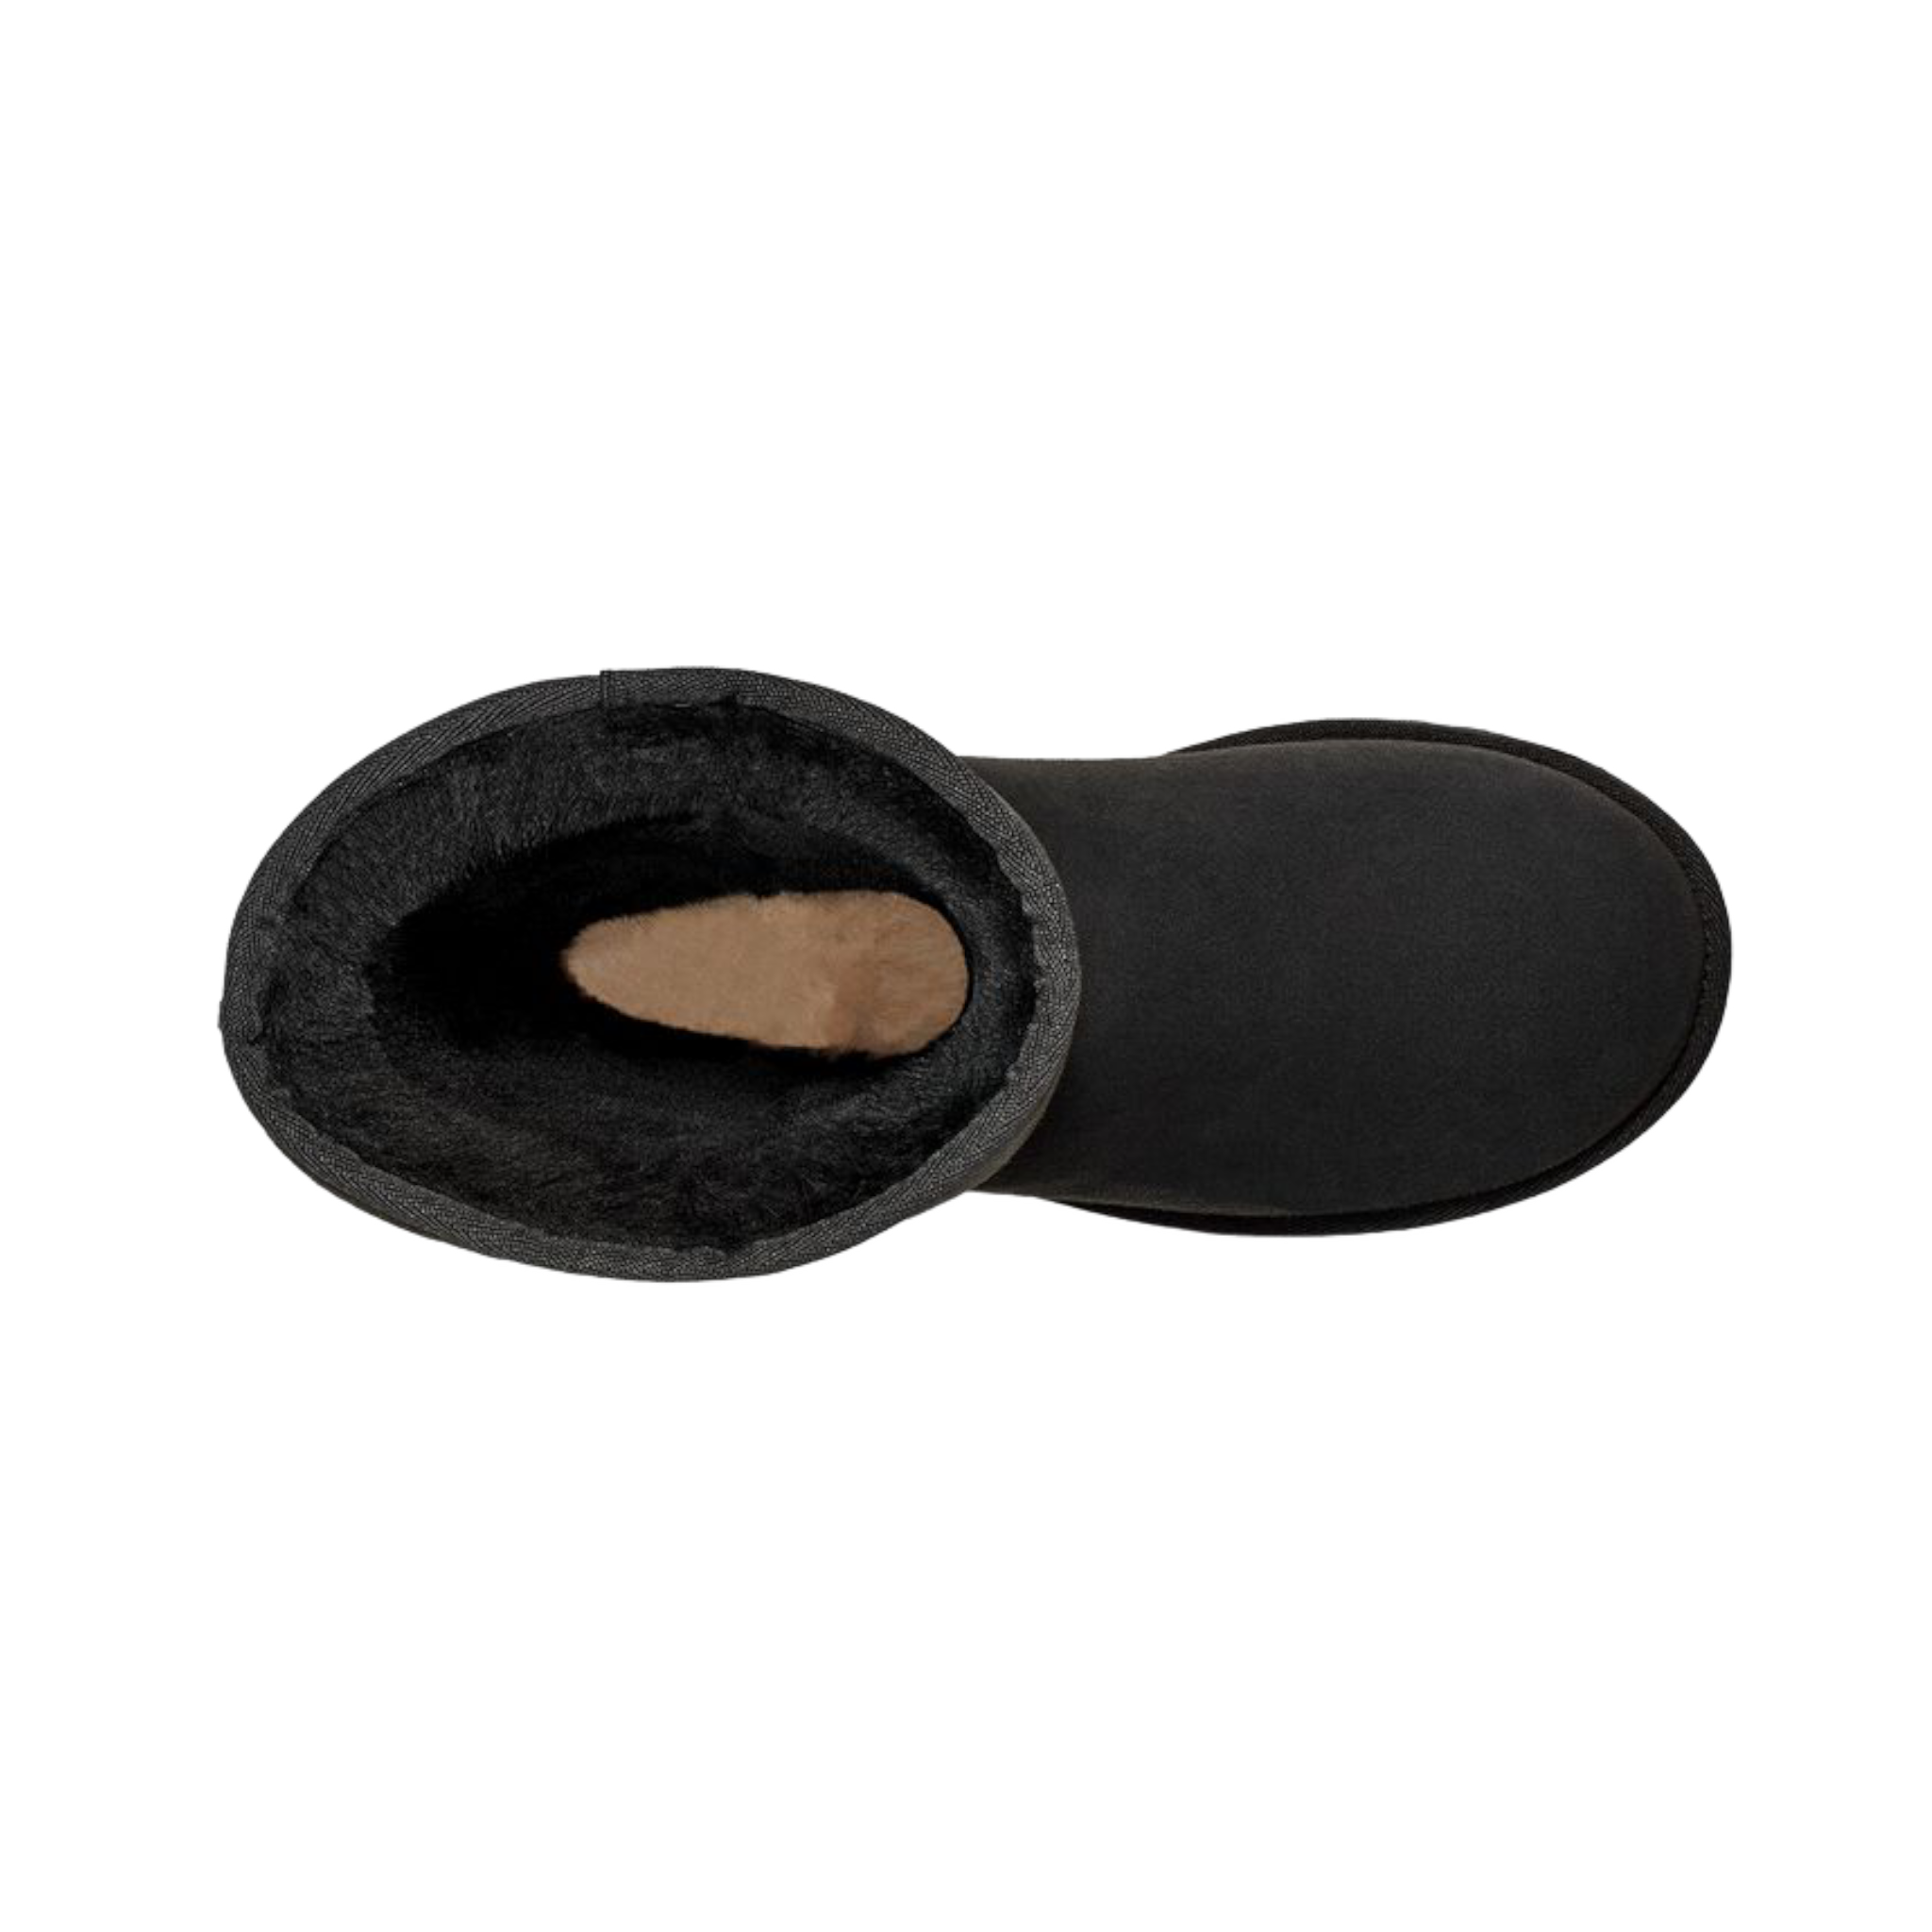 UGG Australia Other Shoe Care & Repair Supplies for sale